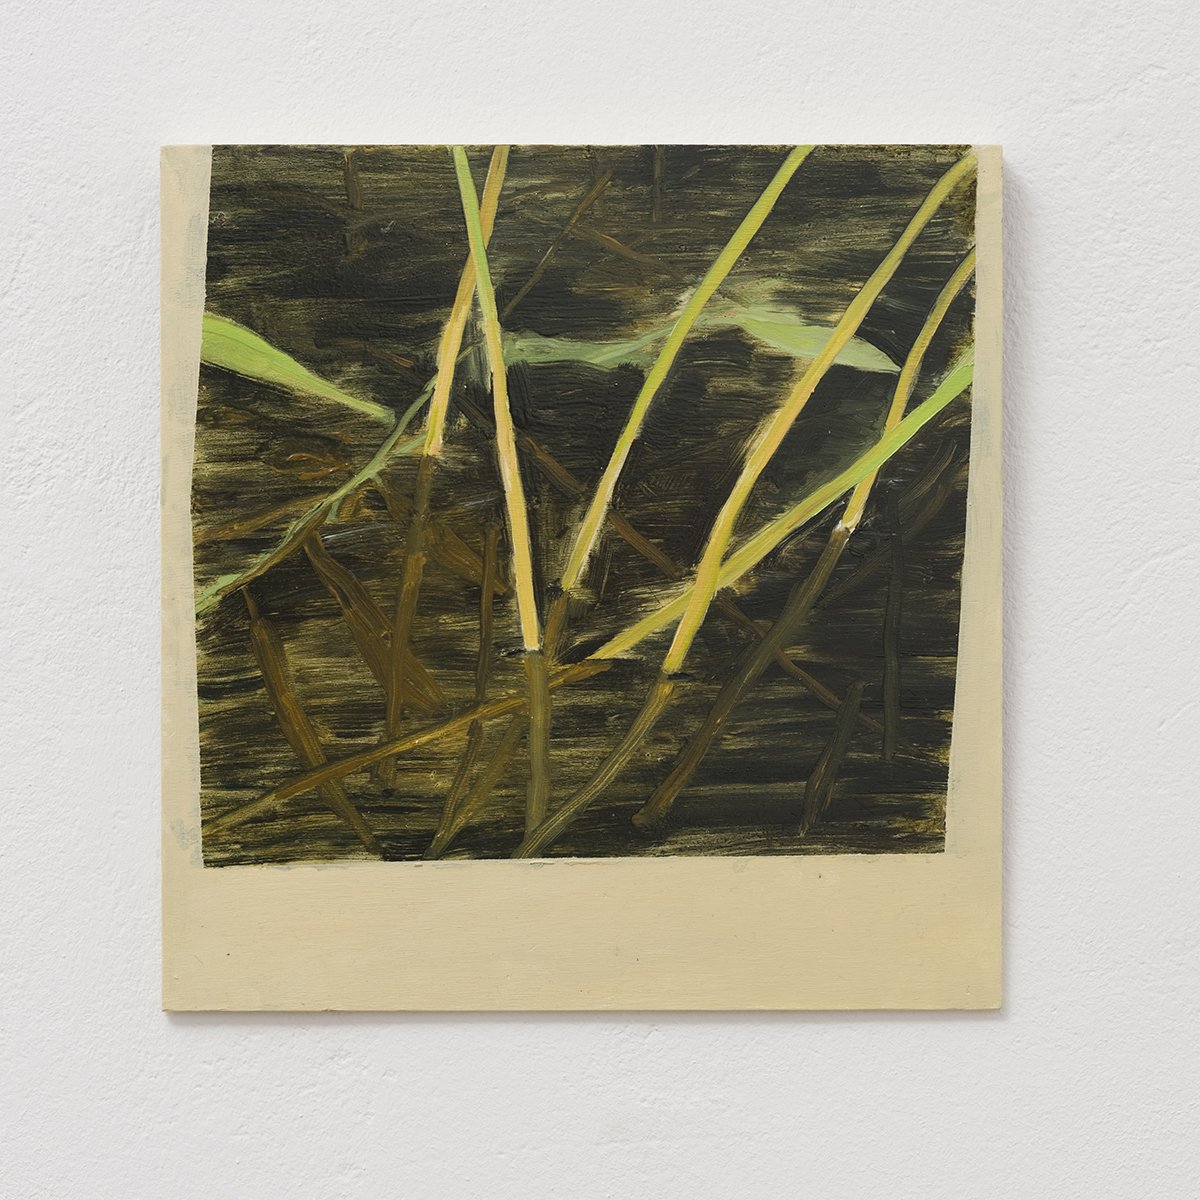   Study for Pond on Wheels XVI     oil on wood    12 x 12 ¾ x 1 inches    30 x 32 cm   2020 